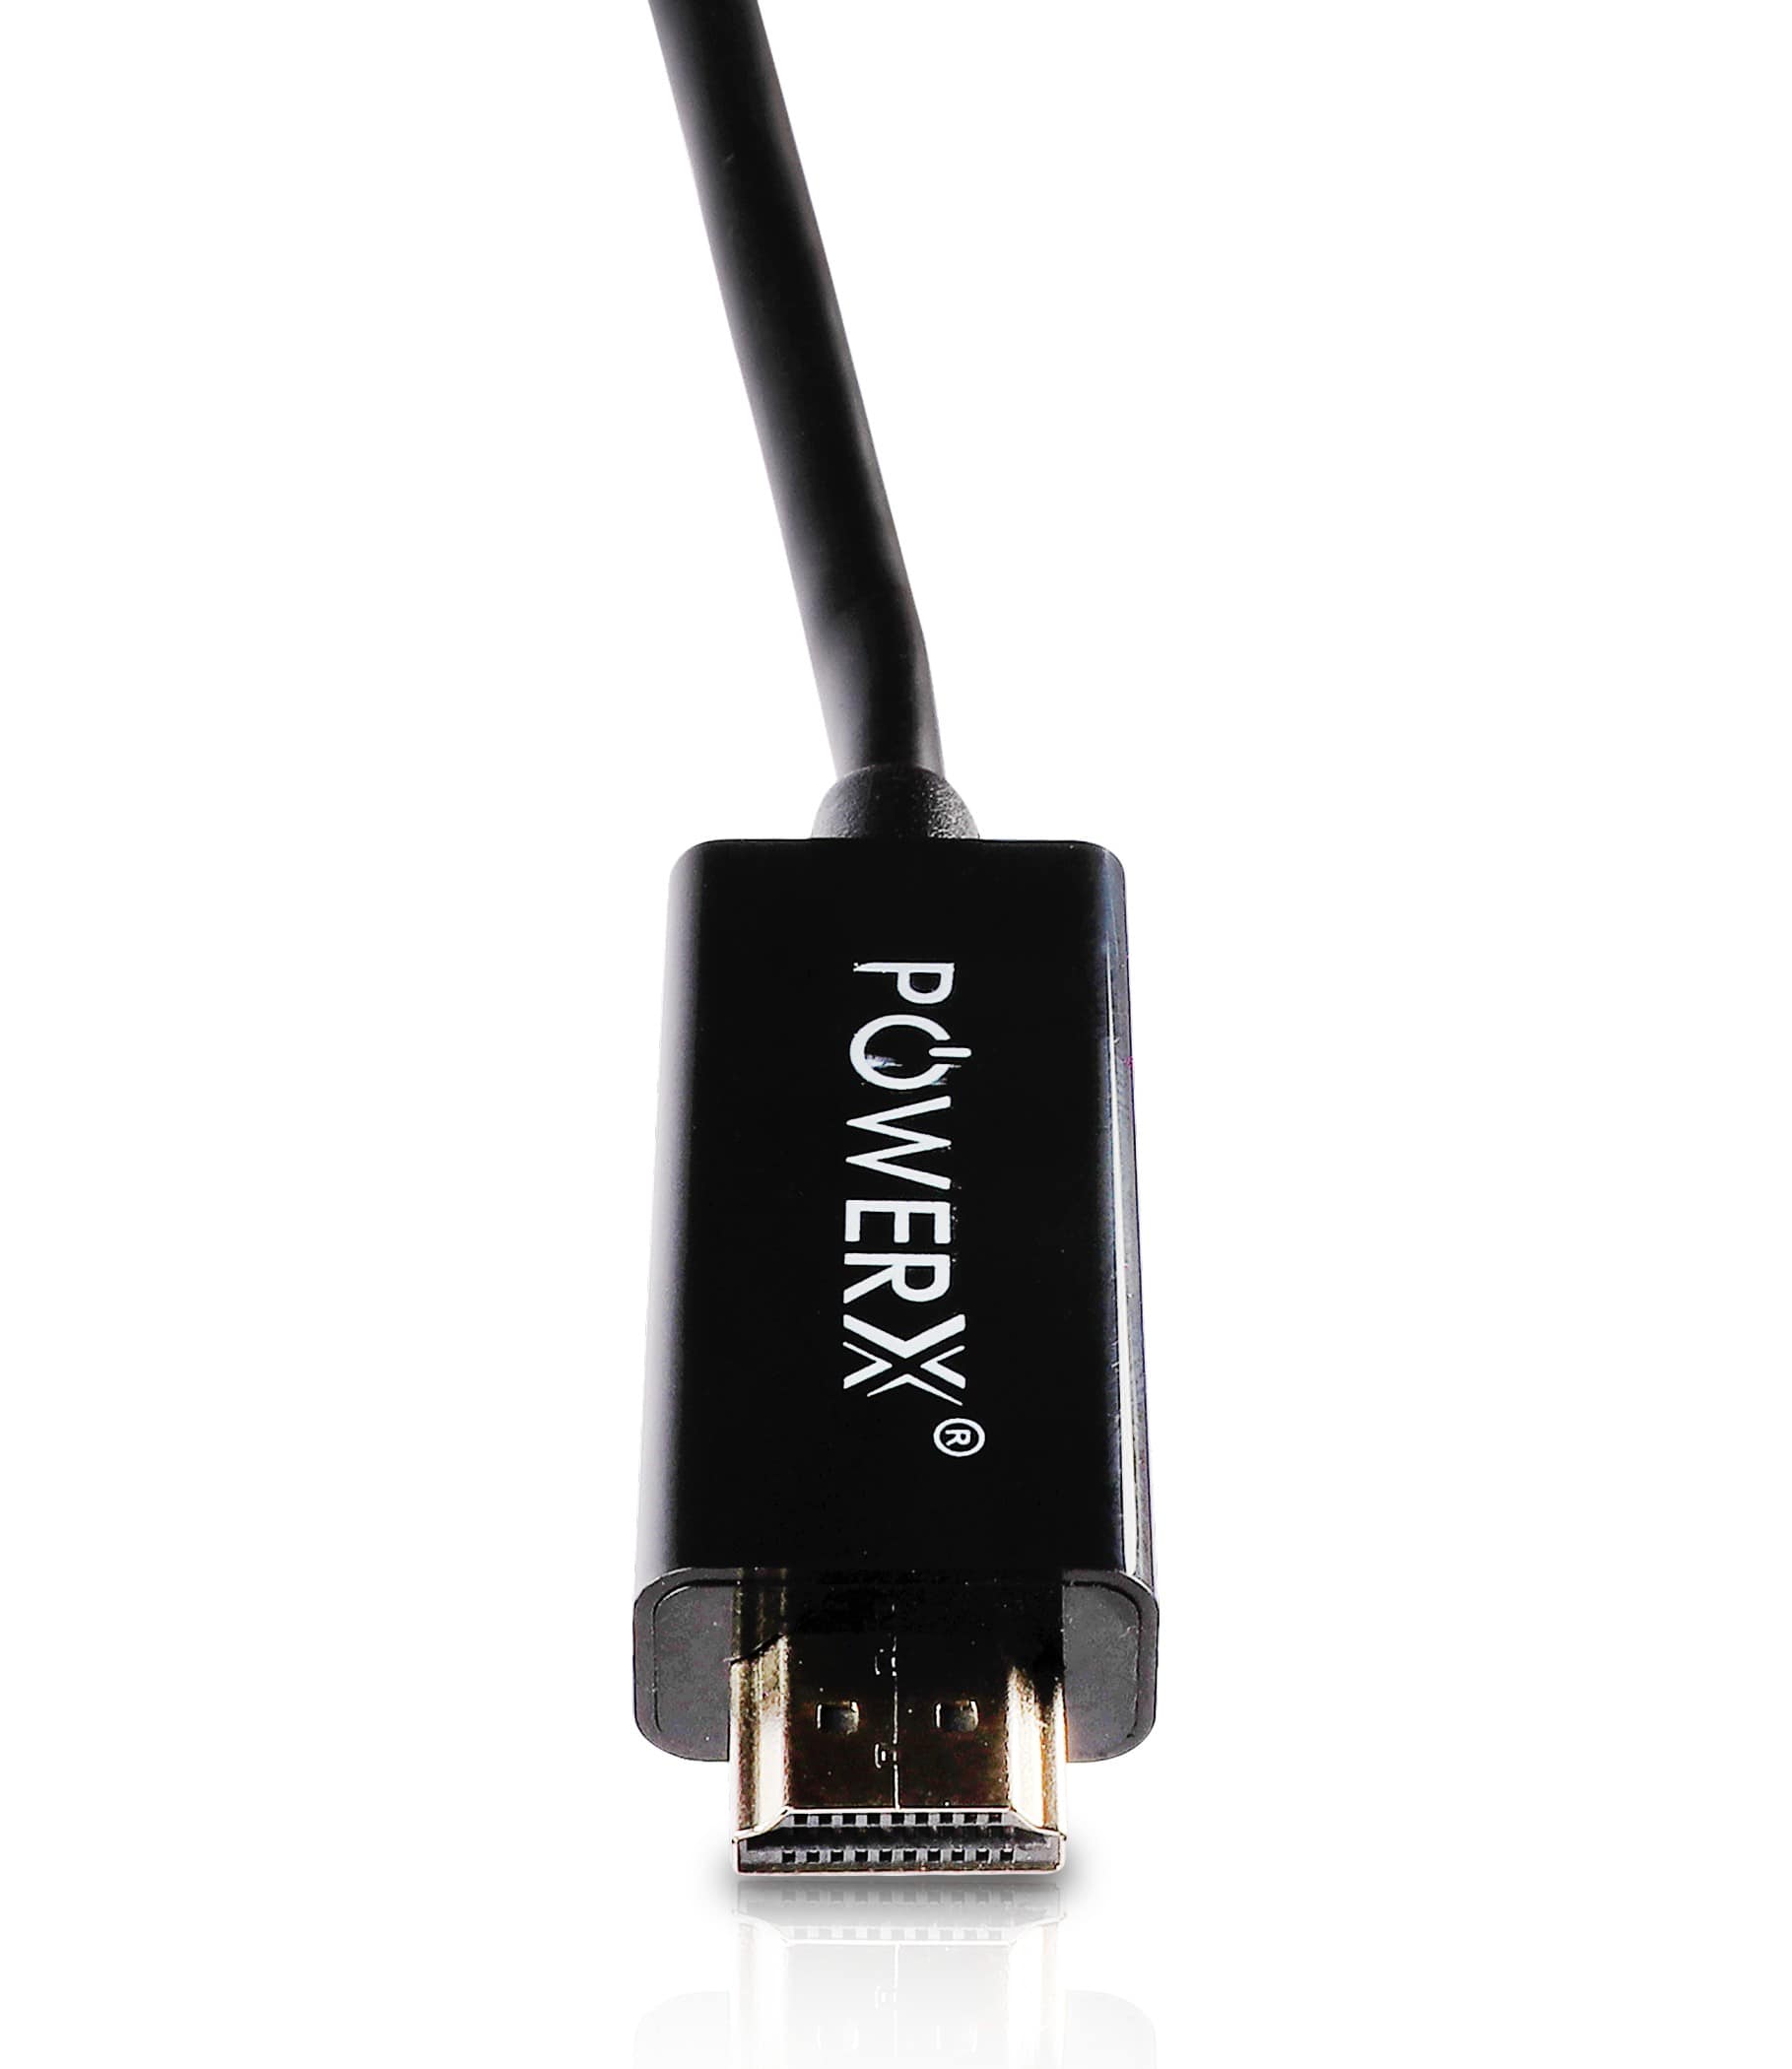 POWER X DP TO HDMI CABLE 1.5 METER